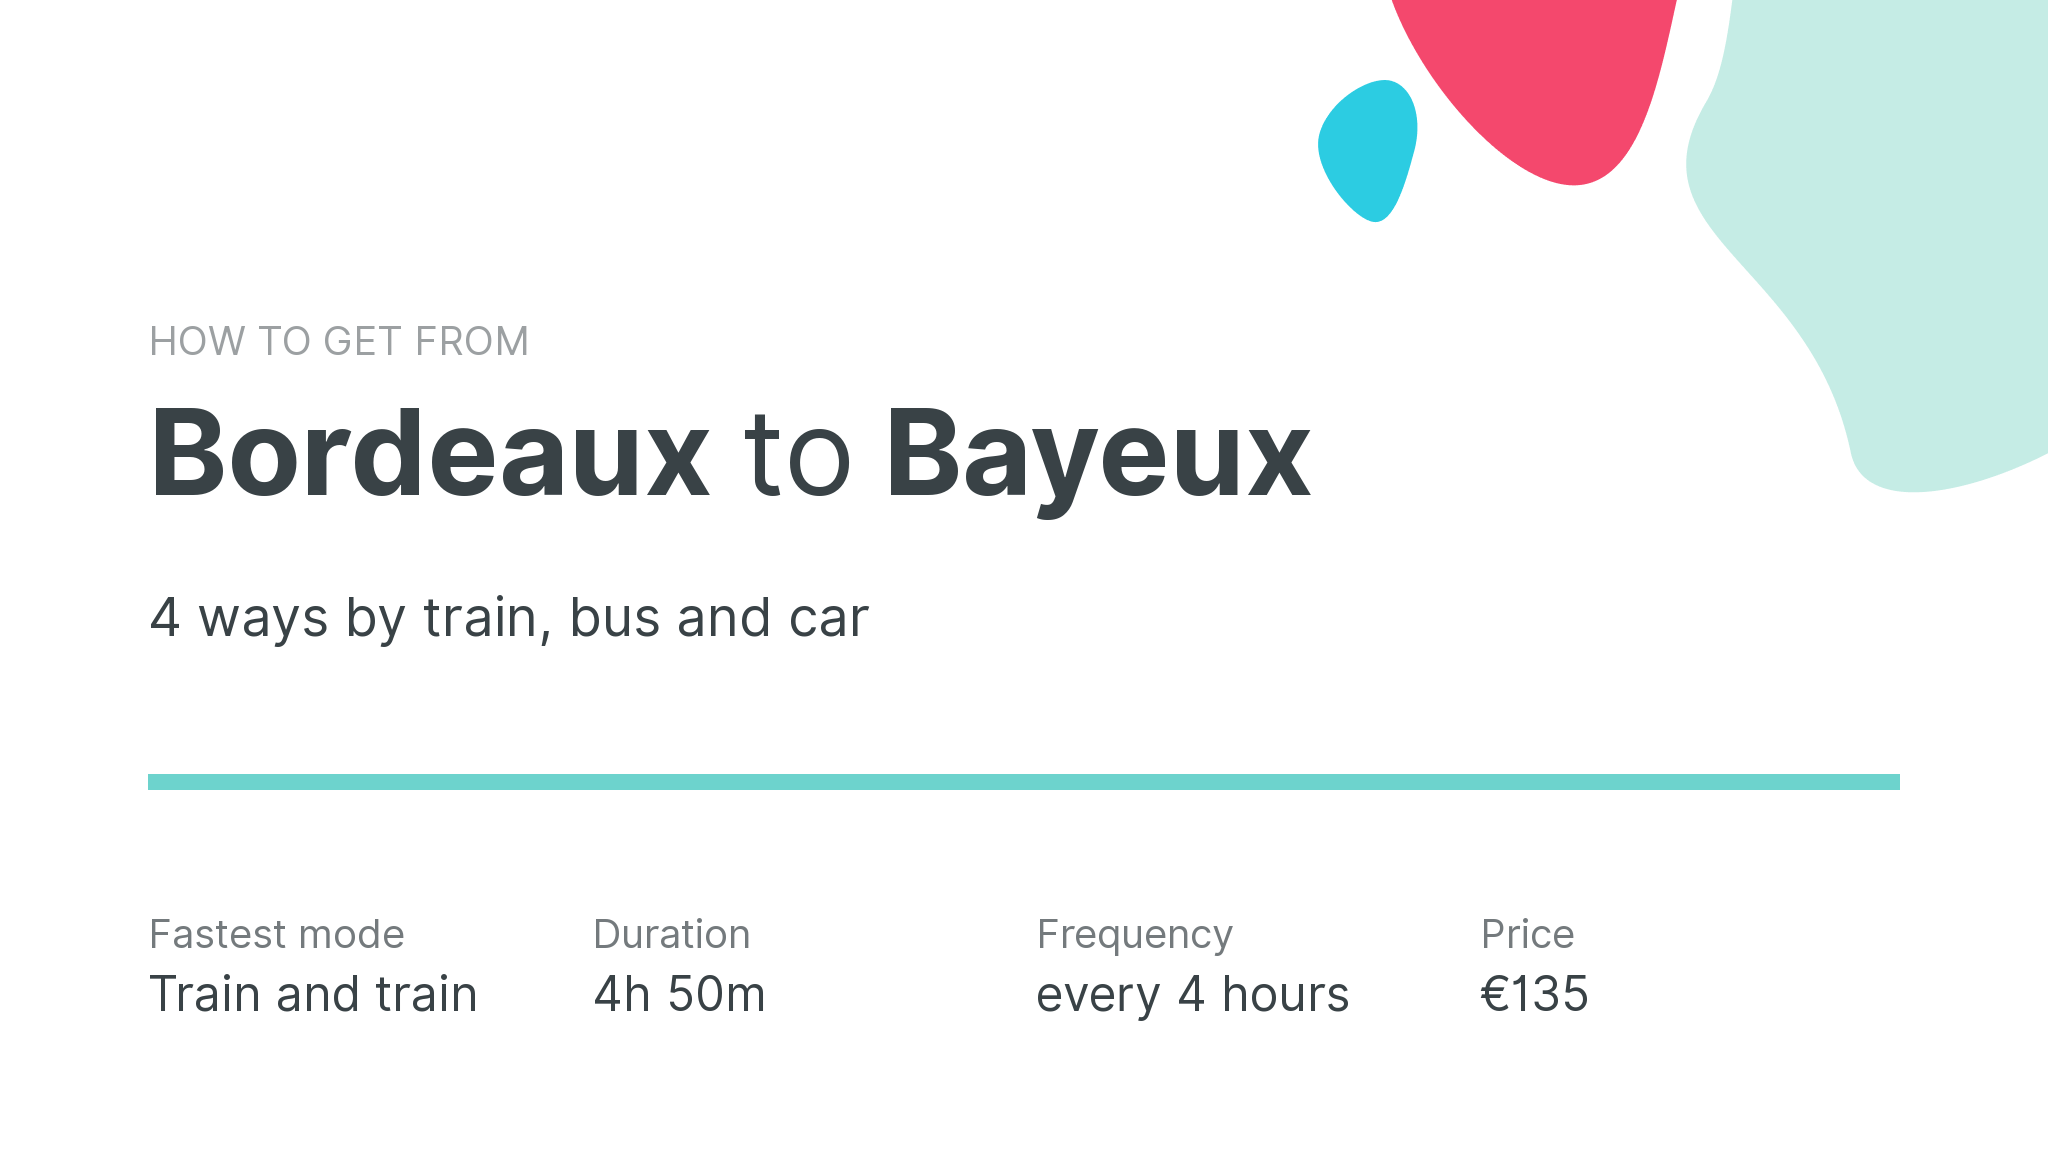 How do I get from Bordeaux to Bayeux